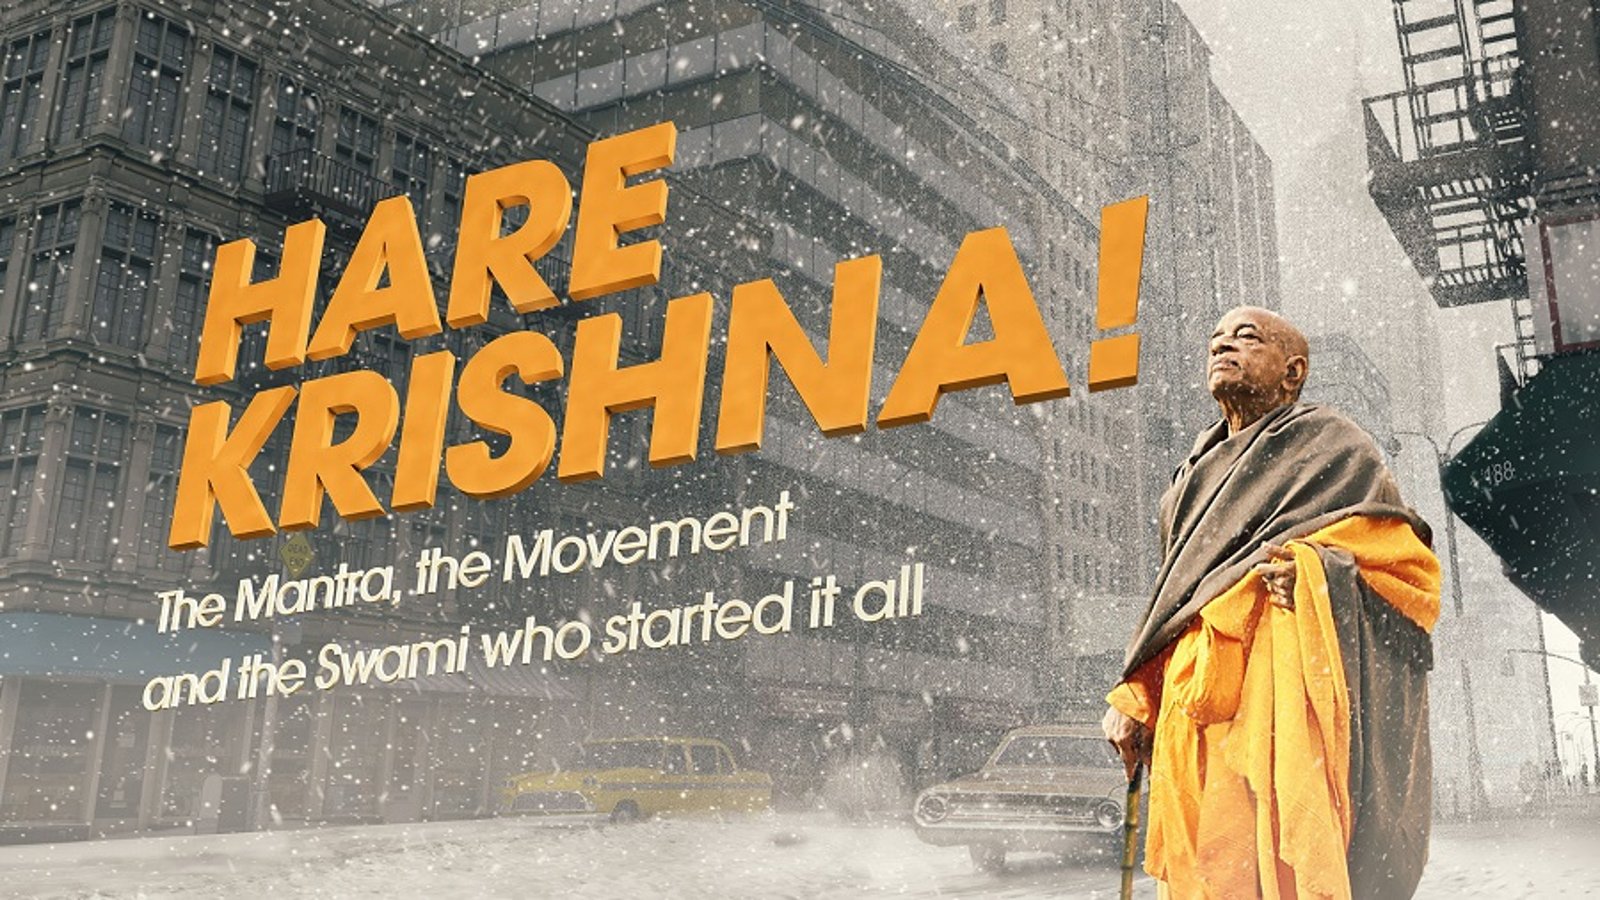 Hare Krishna! - The Mantra, the Movement and the Swami Who Started It All